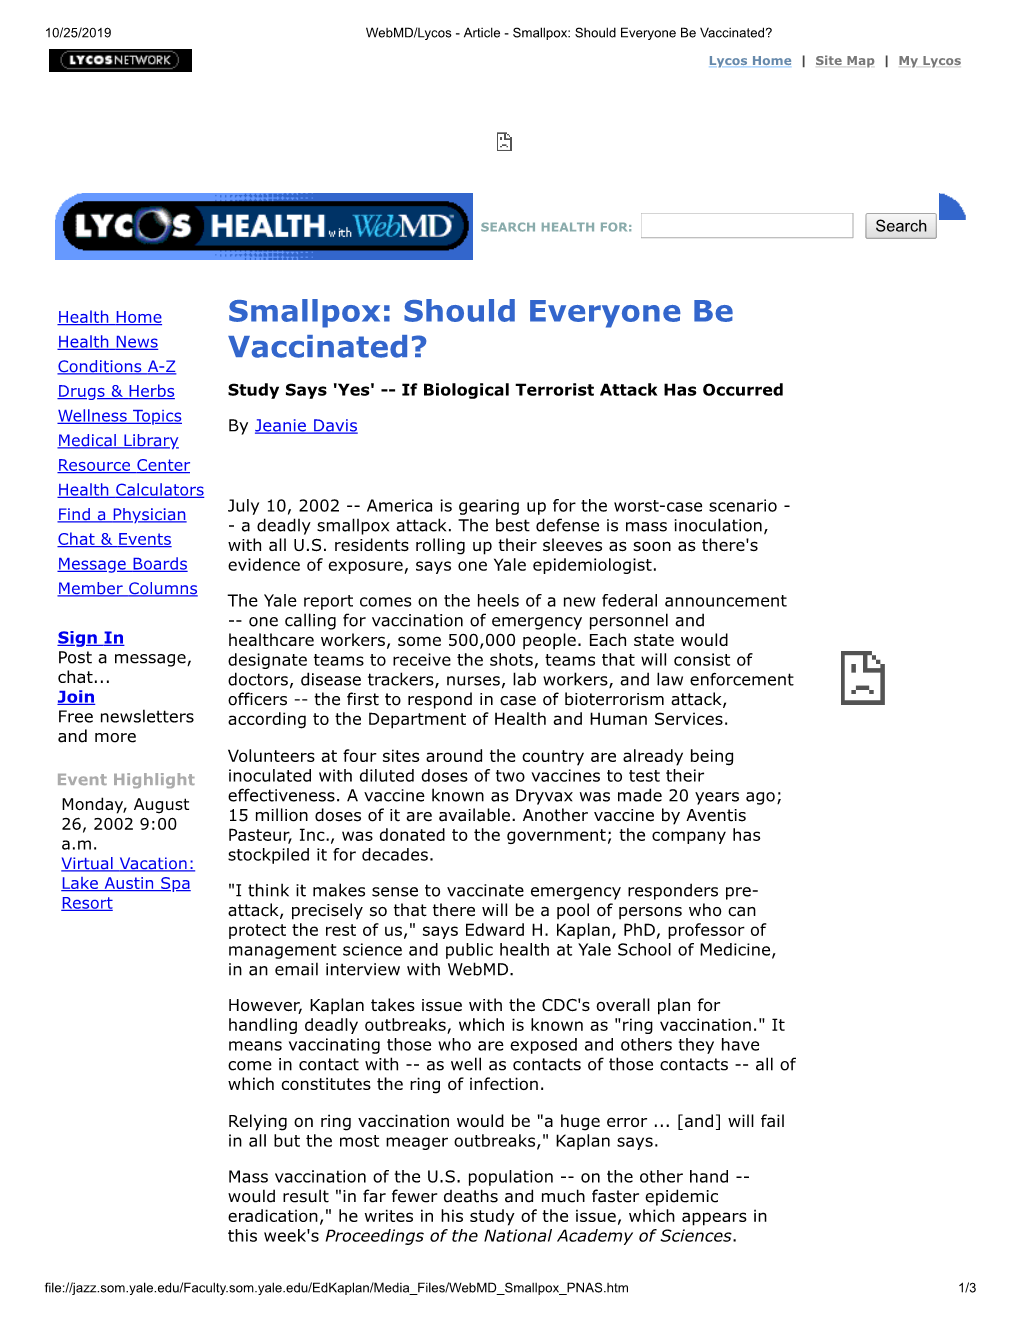 Smallpox: Should Everyone Be Vaccinated?